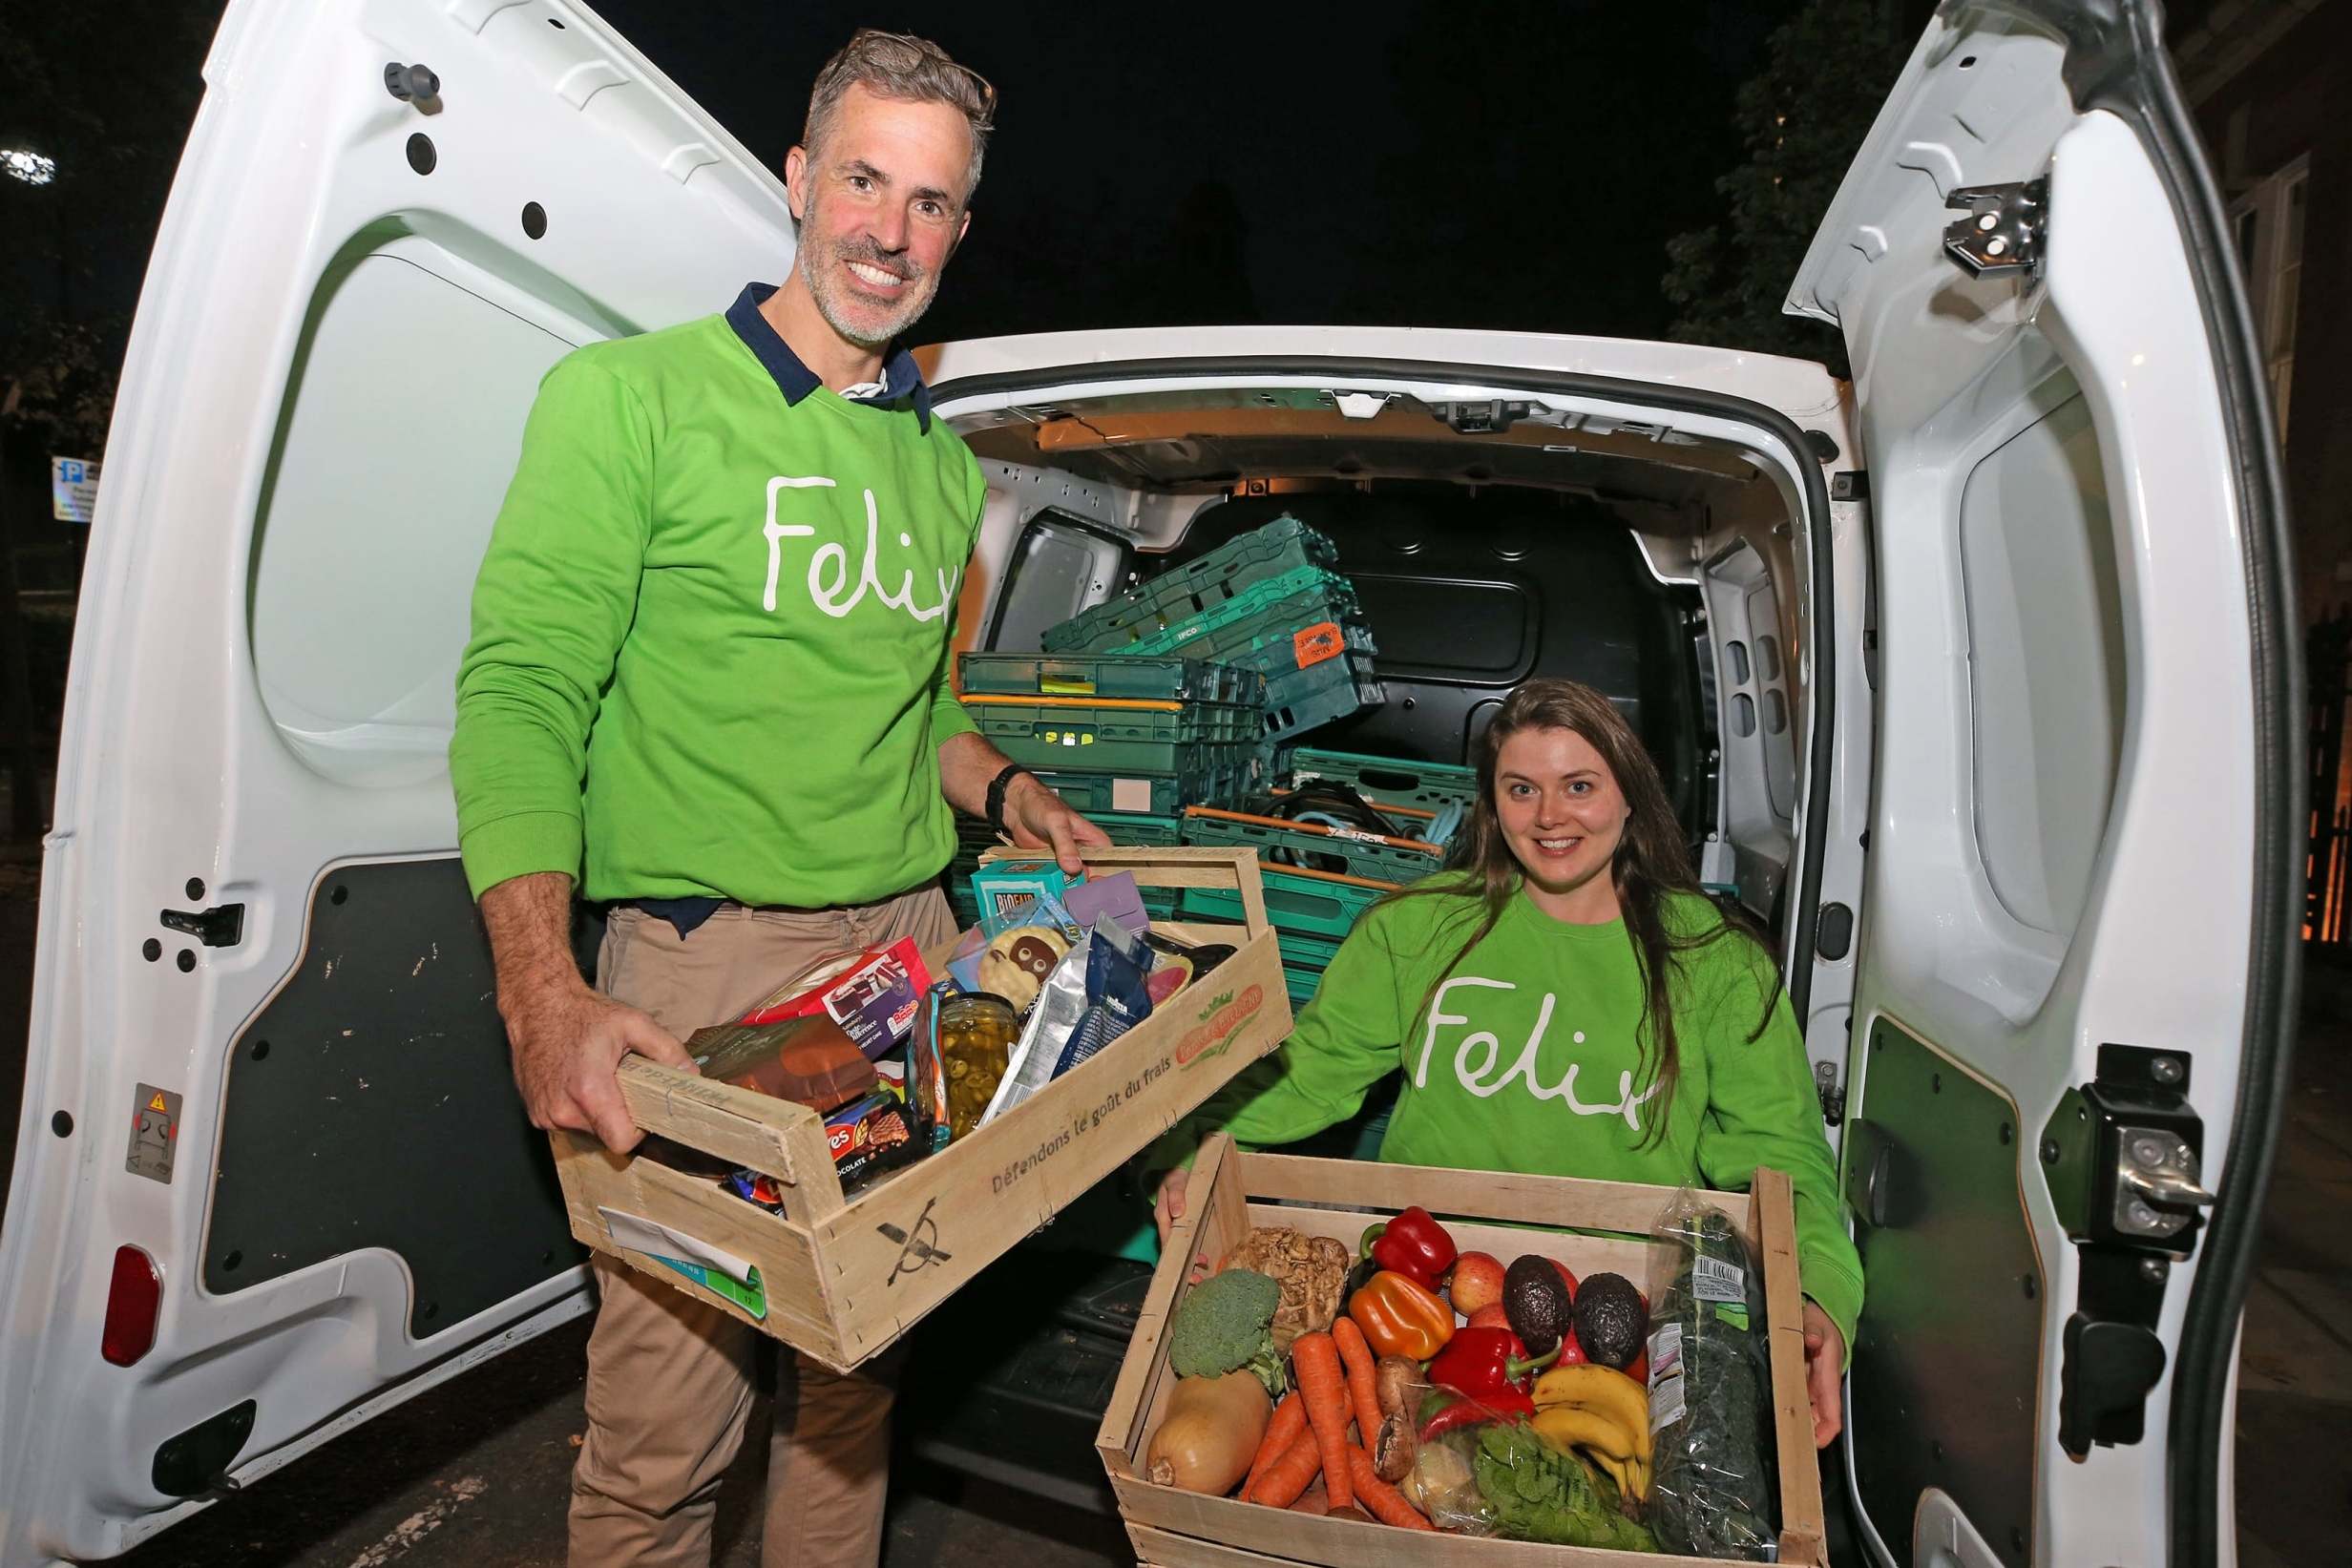 The Felix Project rescues high-quality surplus food that would otherwise go to waste